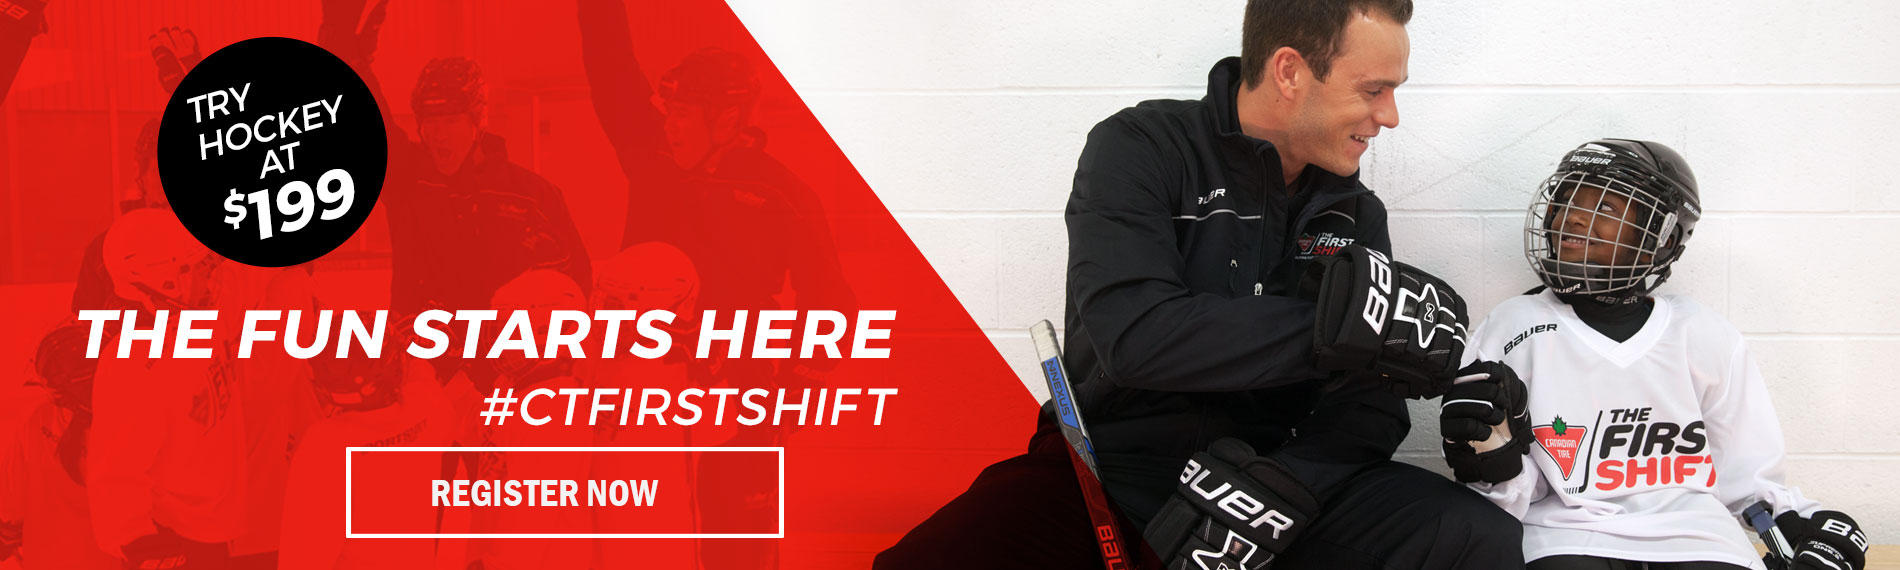 The First Shift Hockey Program for girls and boys ages 610.